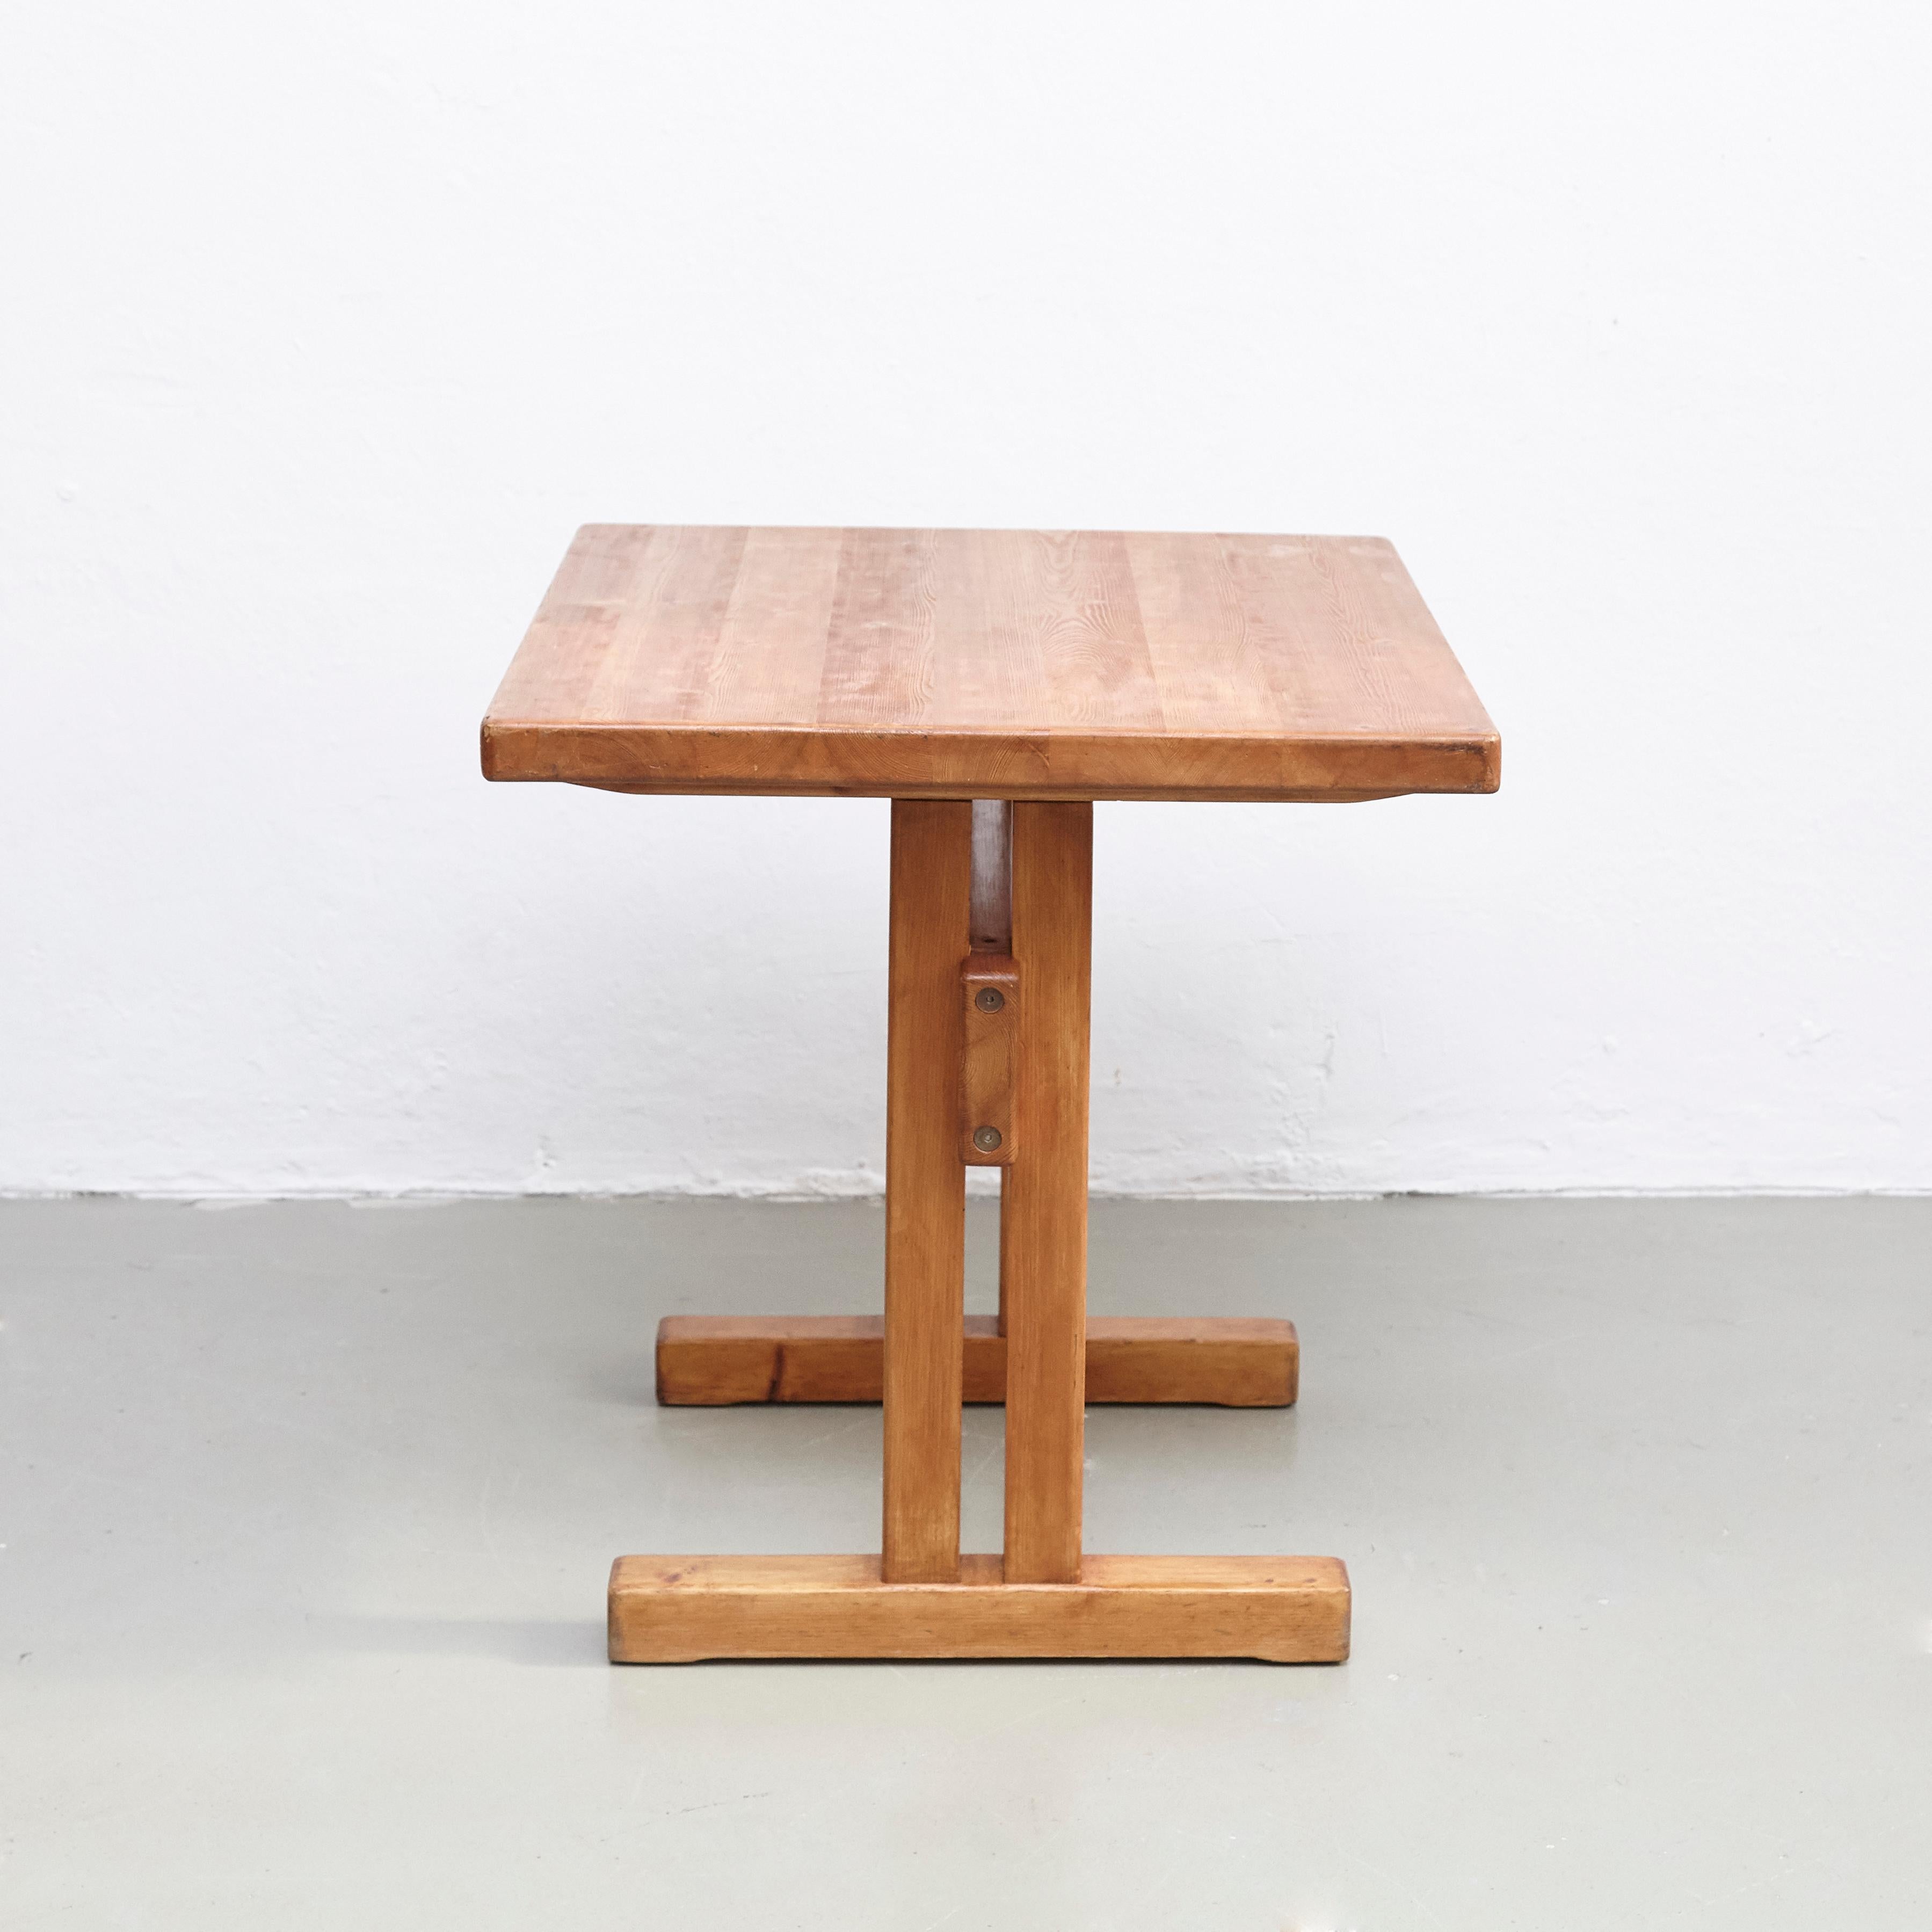 French Charlotte Perriand Small Wood Table for Les Arcs, circa 1960